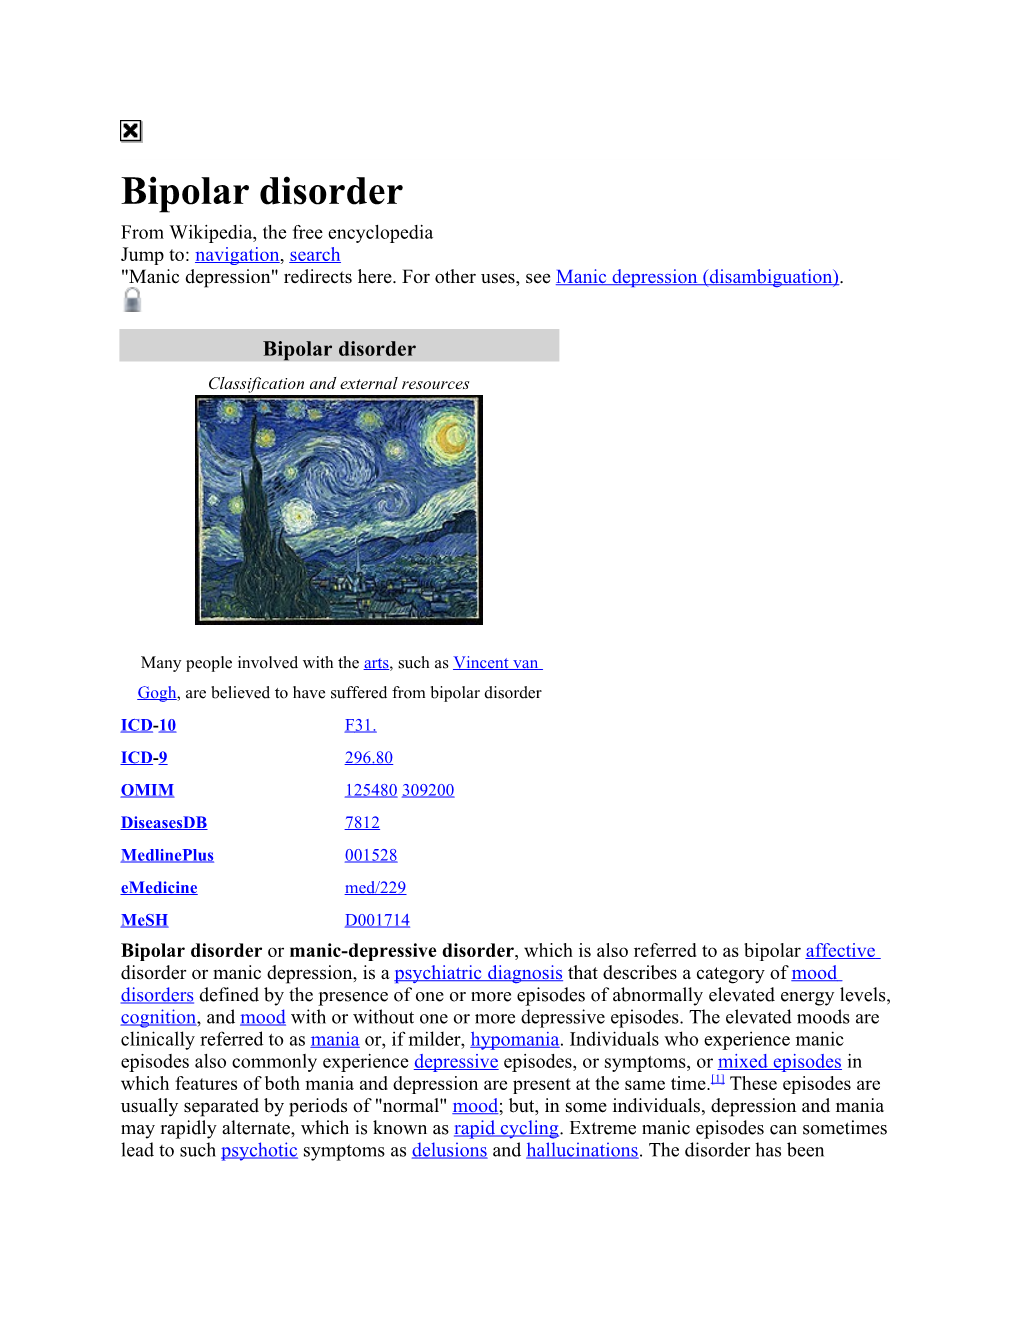 Bipolar Disorder from Wikipedia, the Free Encyclopedia Jump To: Navigation, Search "Manic Depression" Redirects Here